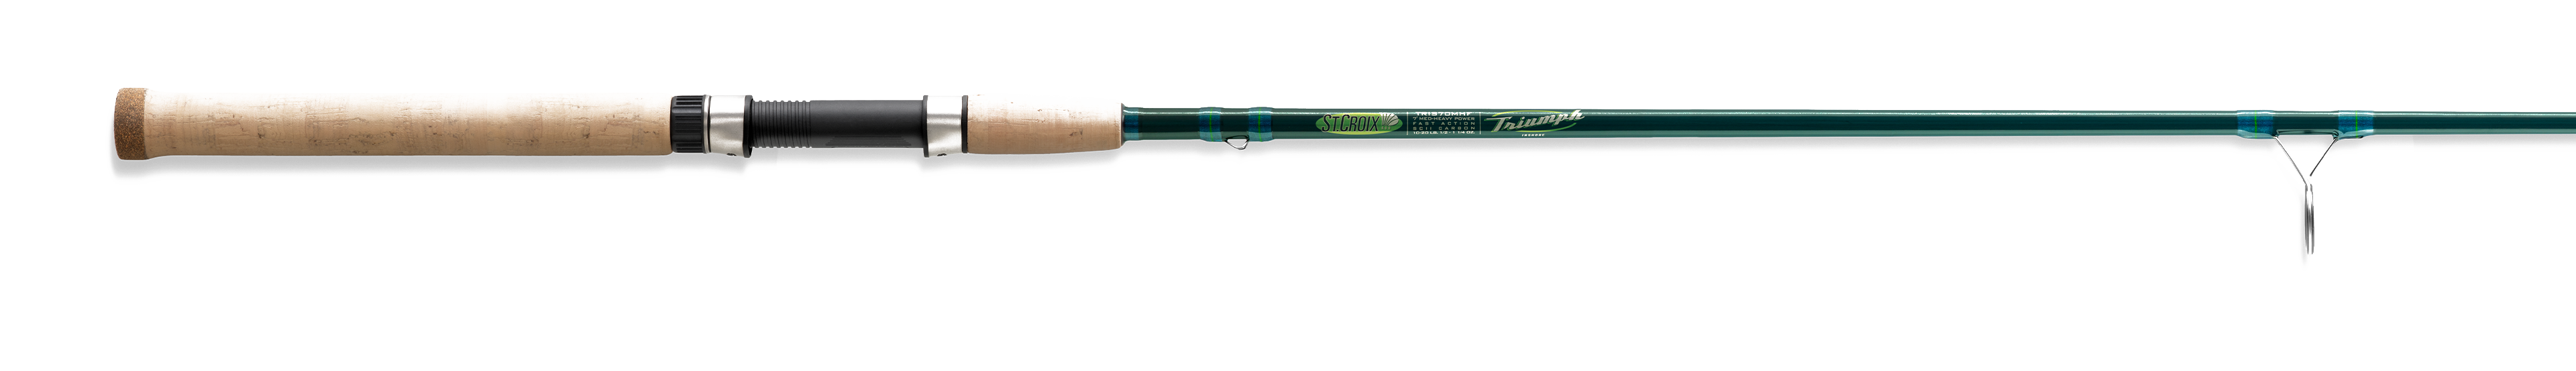 St. Croix Triumph Inshore Spinning Rods – Tackle World